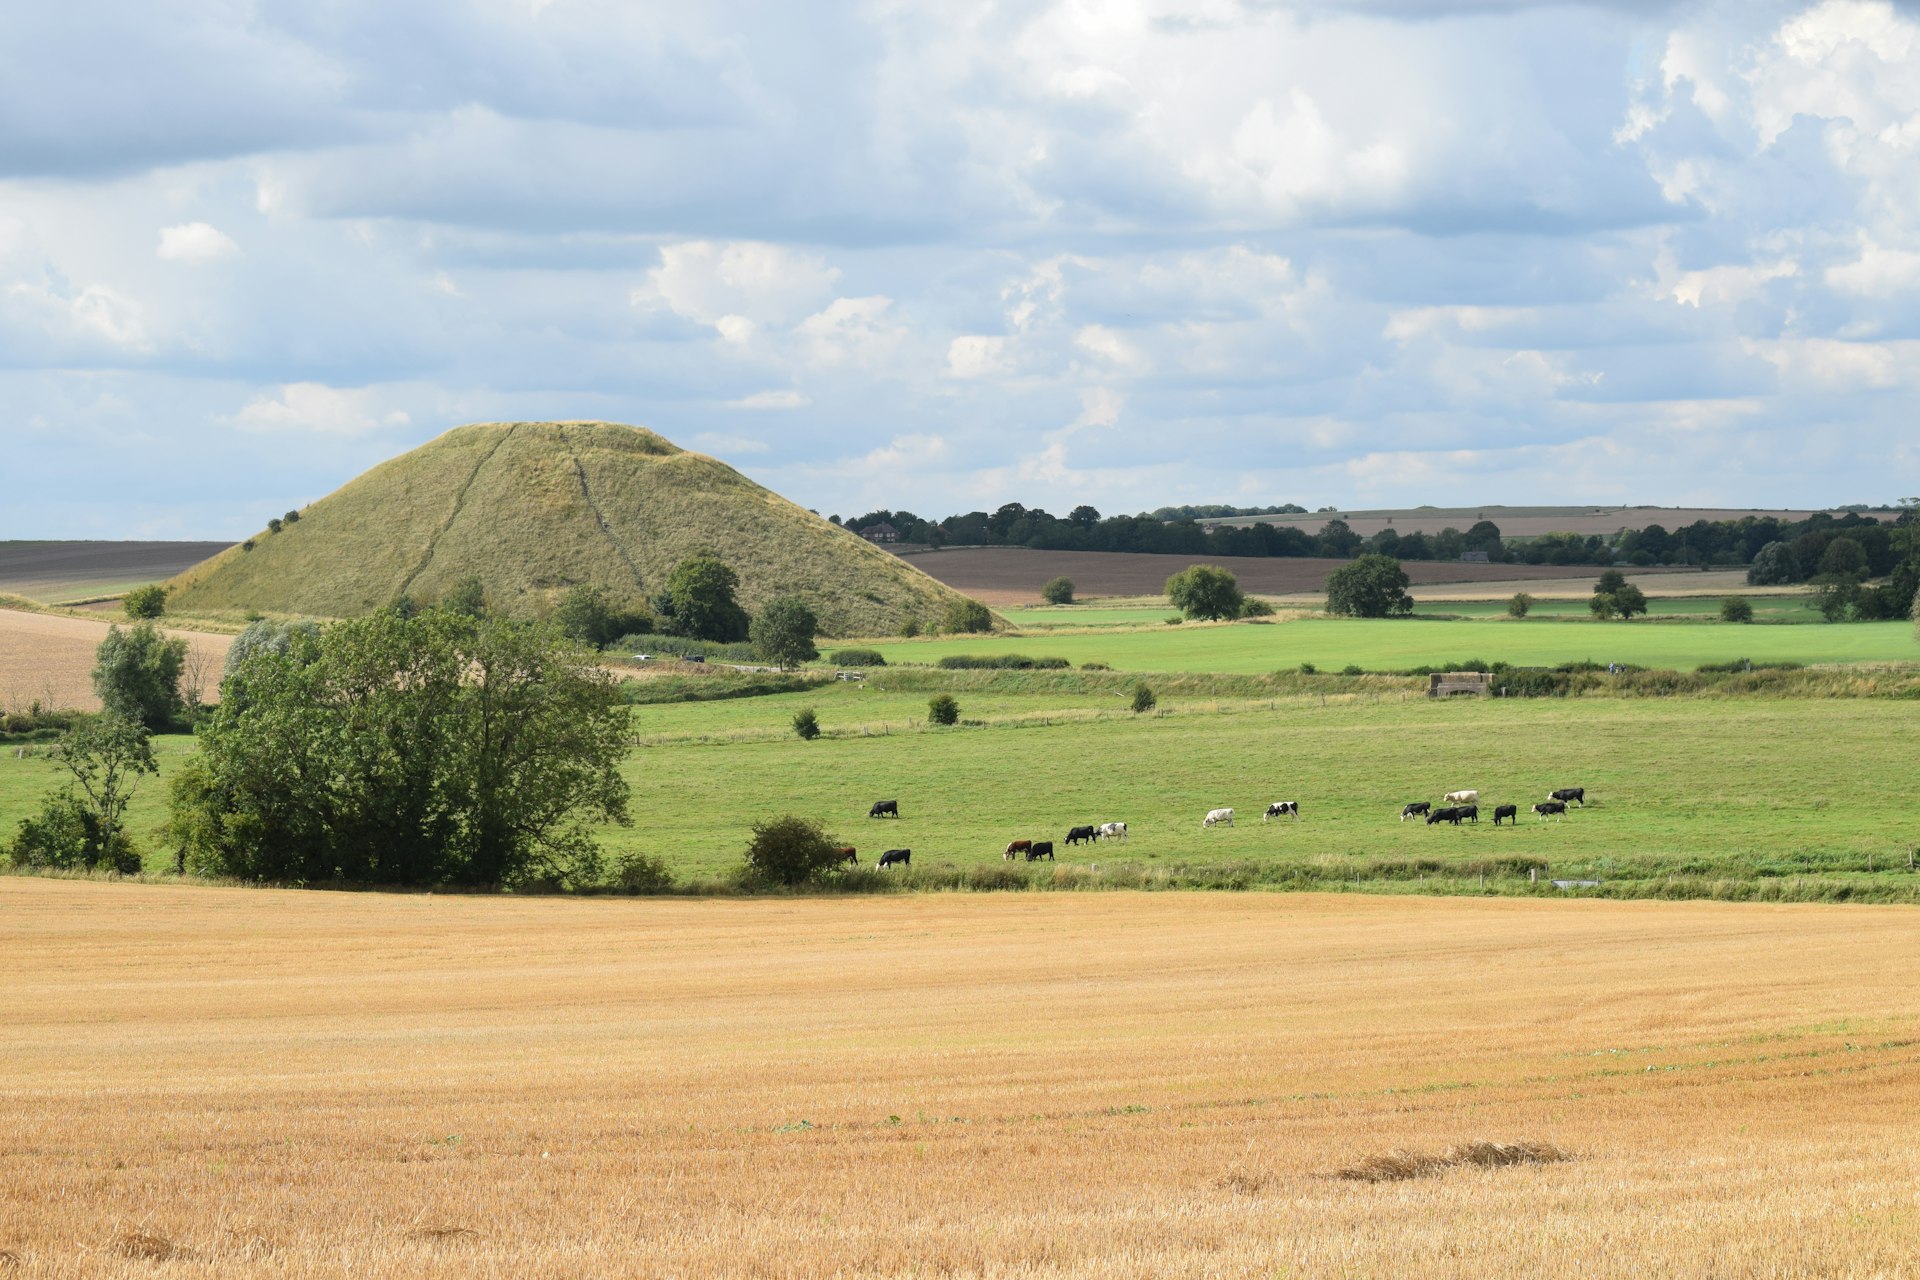 A large hill-like mound of earth covered in grass in an otherwise completely flat arable landscape